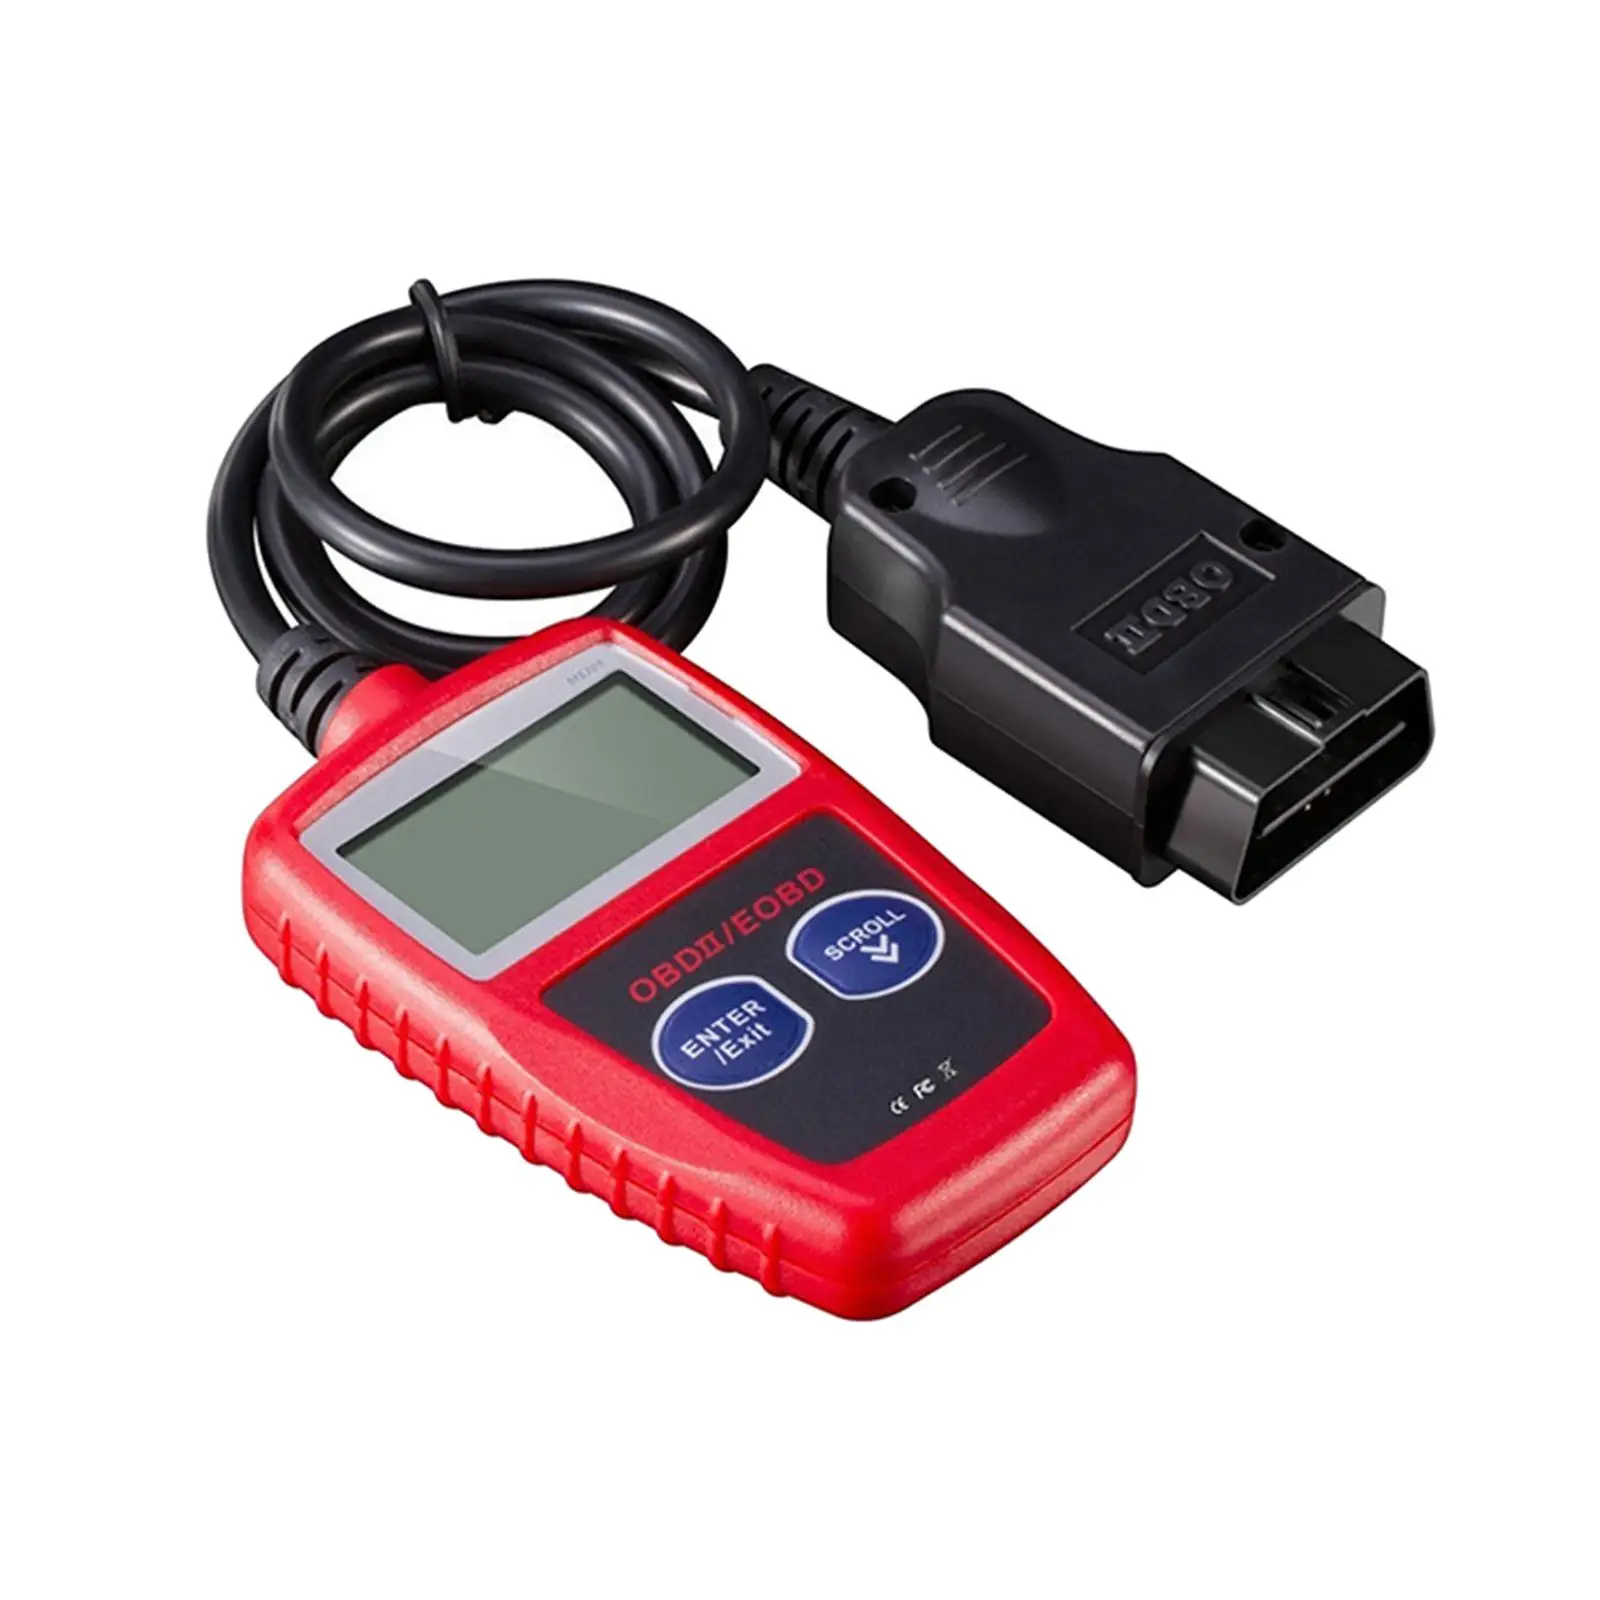 

OBD2 Scanner Car Check Engine Fault Diagnostic Tool for All OBD II protocol Cars since 1996 Replaces OBD II Vehicle Code Reader